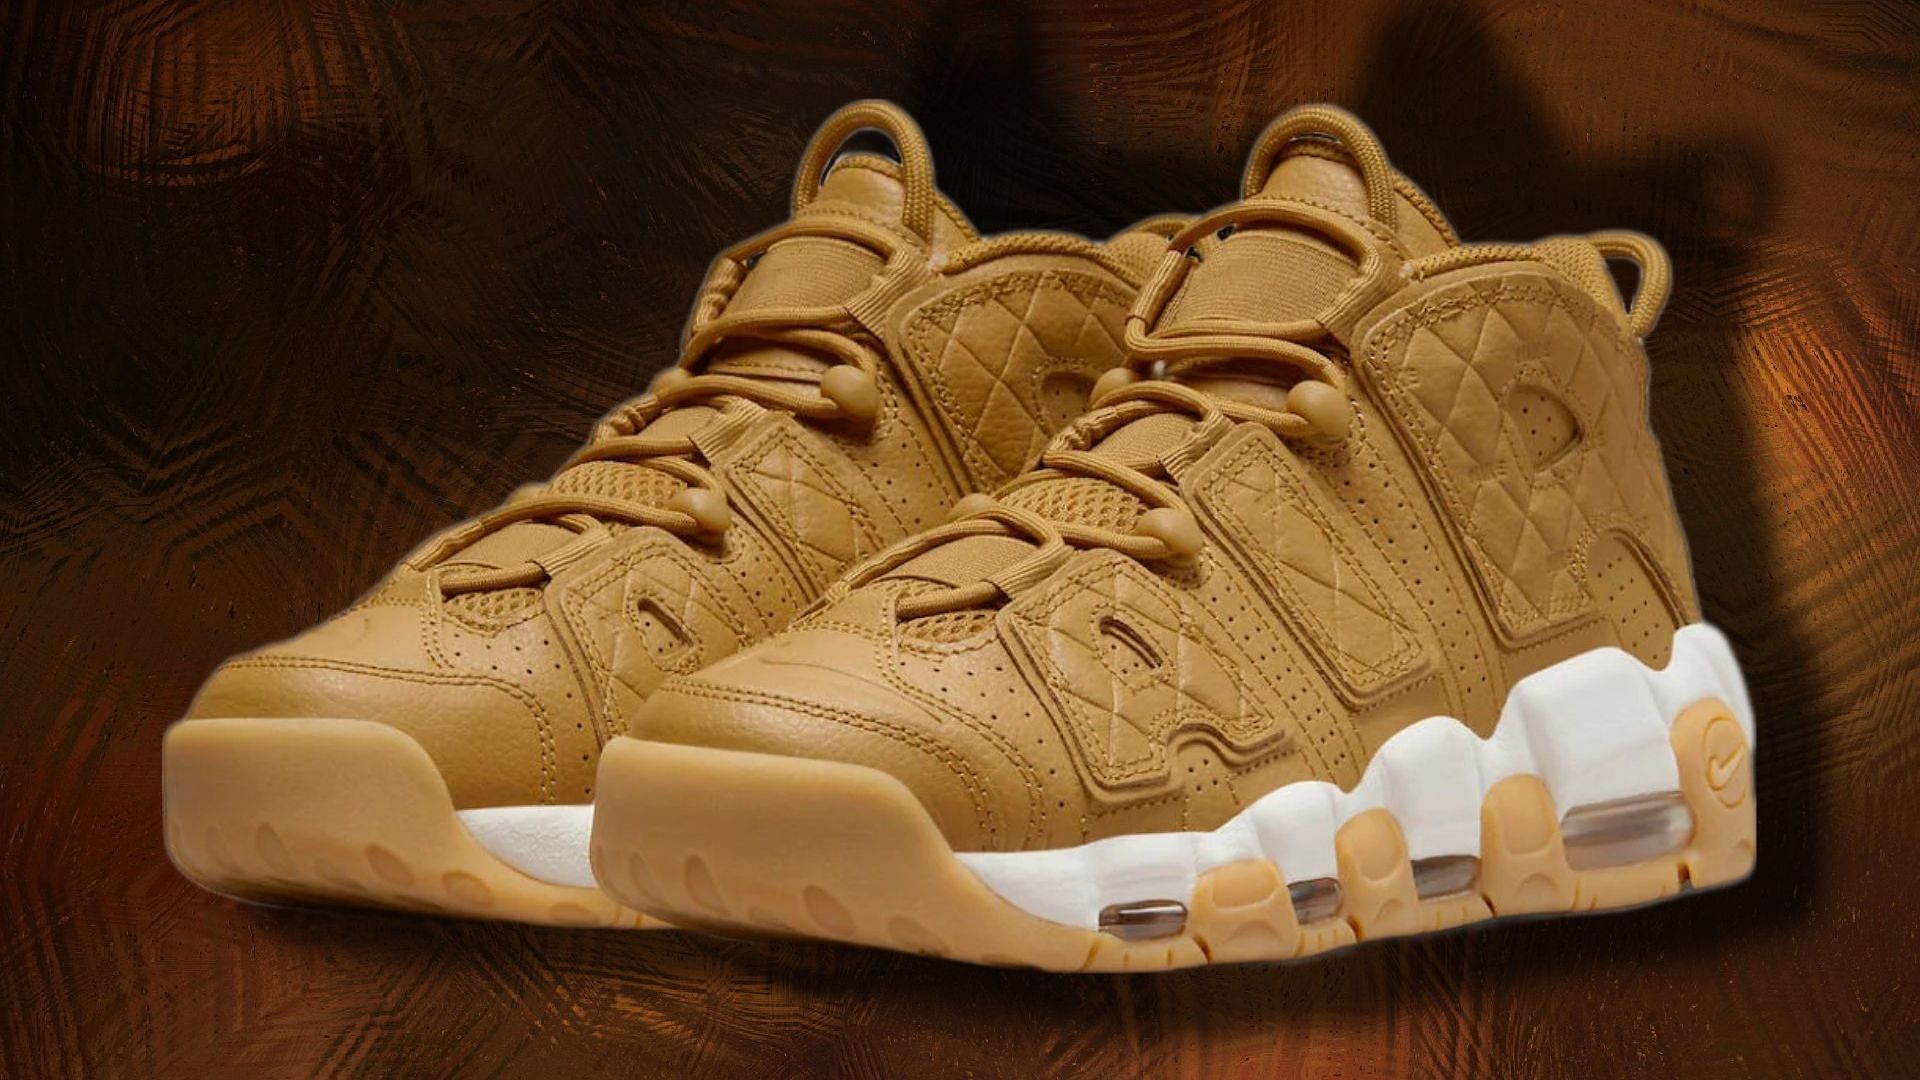 Where to buy Nike Air More Uptempo Wheat shoes? Price, release date, and  more details explored